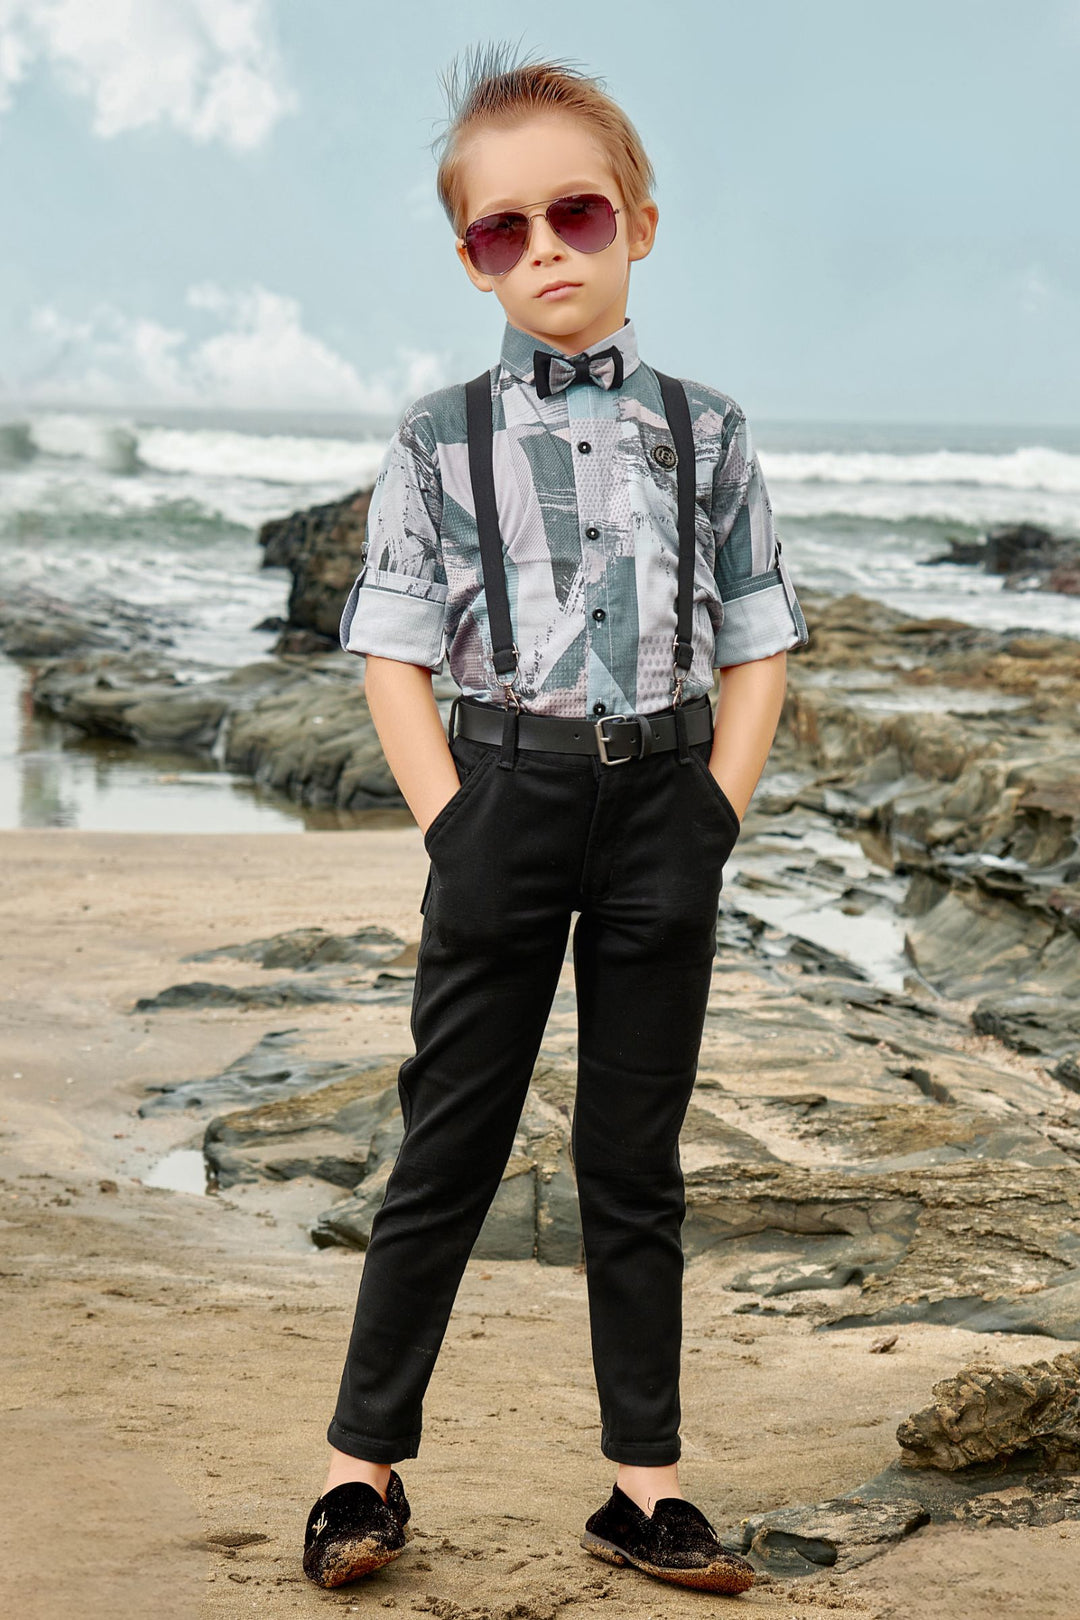 Multicolor Printed with Black Suspender Style Pant Shirt Set for Boys with Bow and Belt